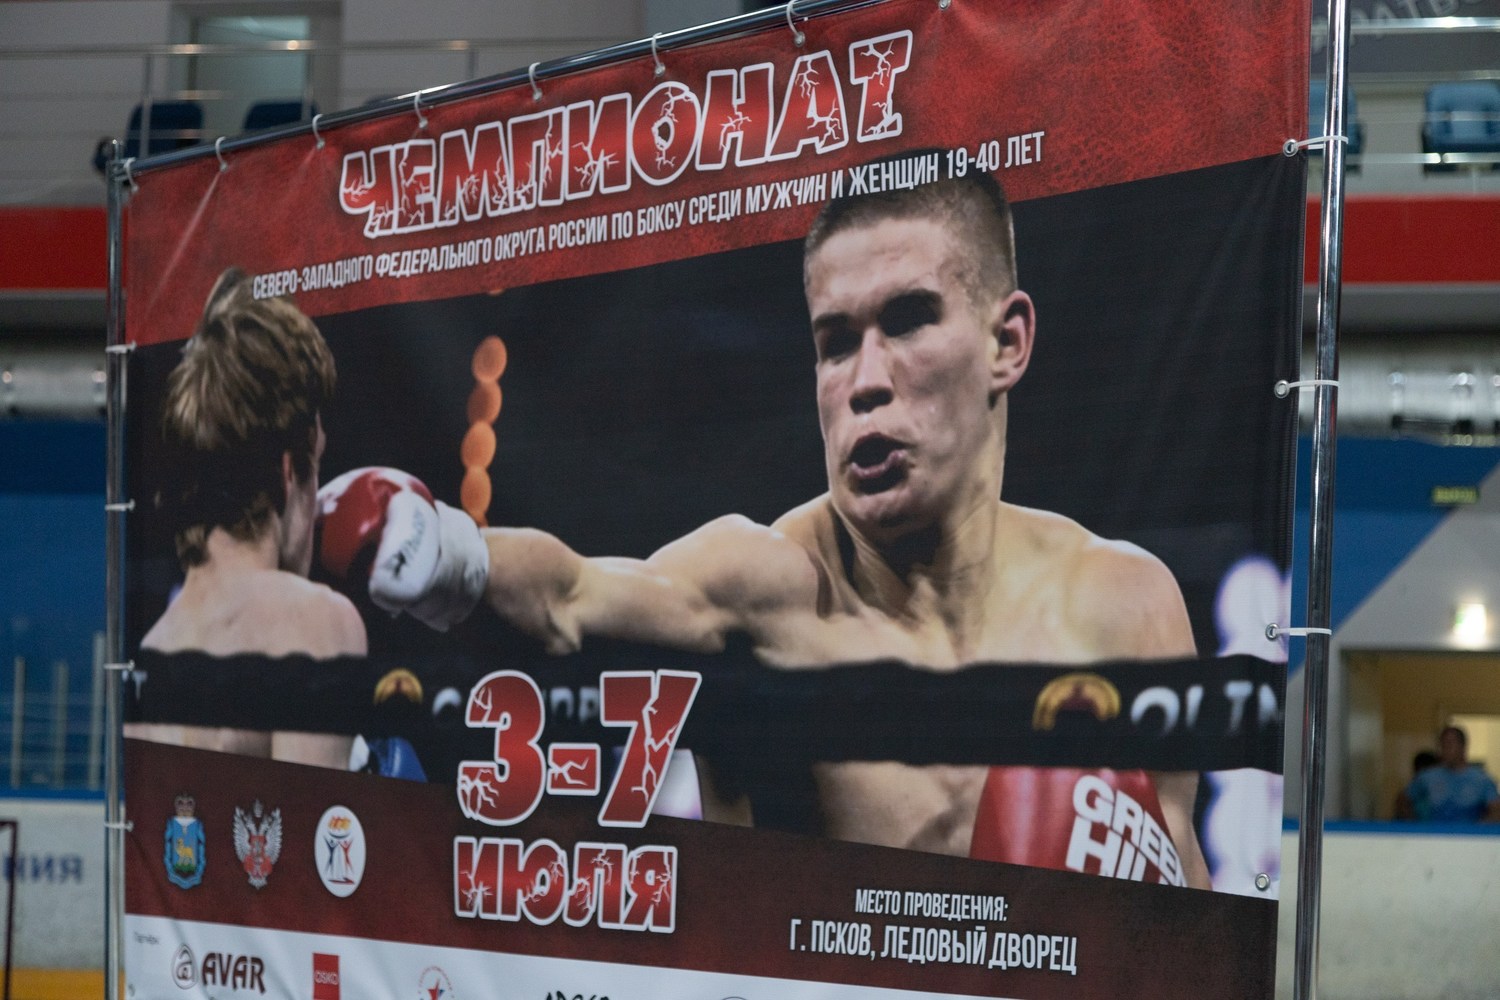 Hook on the right, hook on the left: the strongest boxers of the North-West compete in Pskov